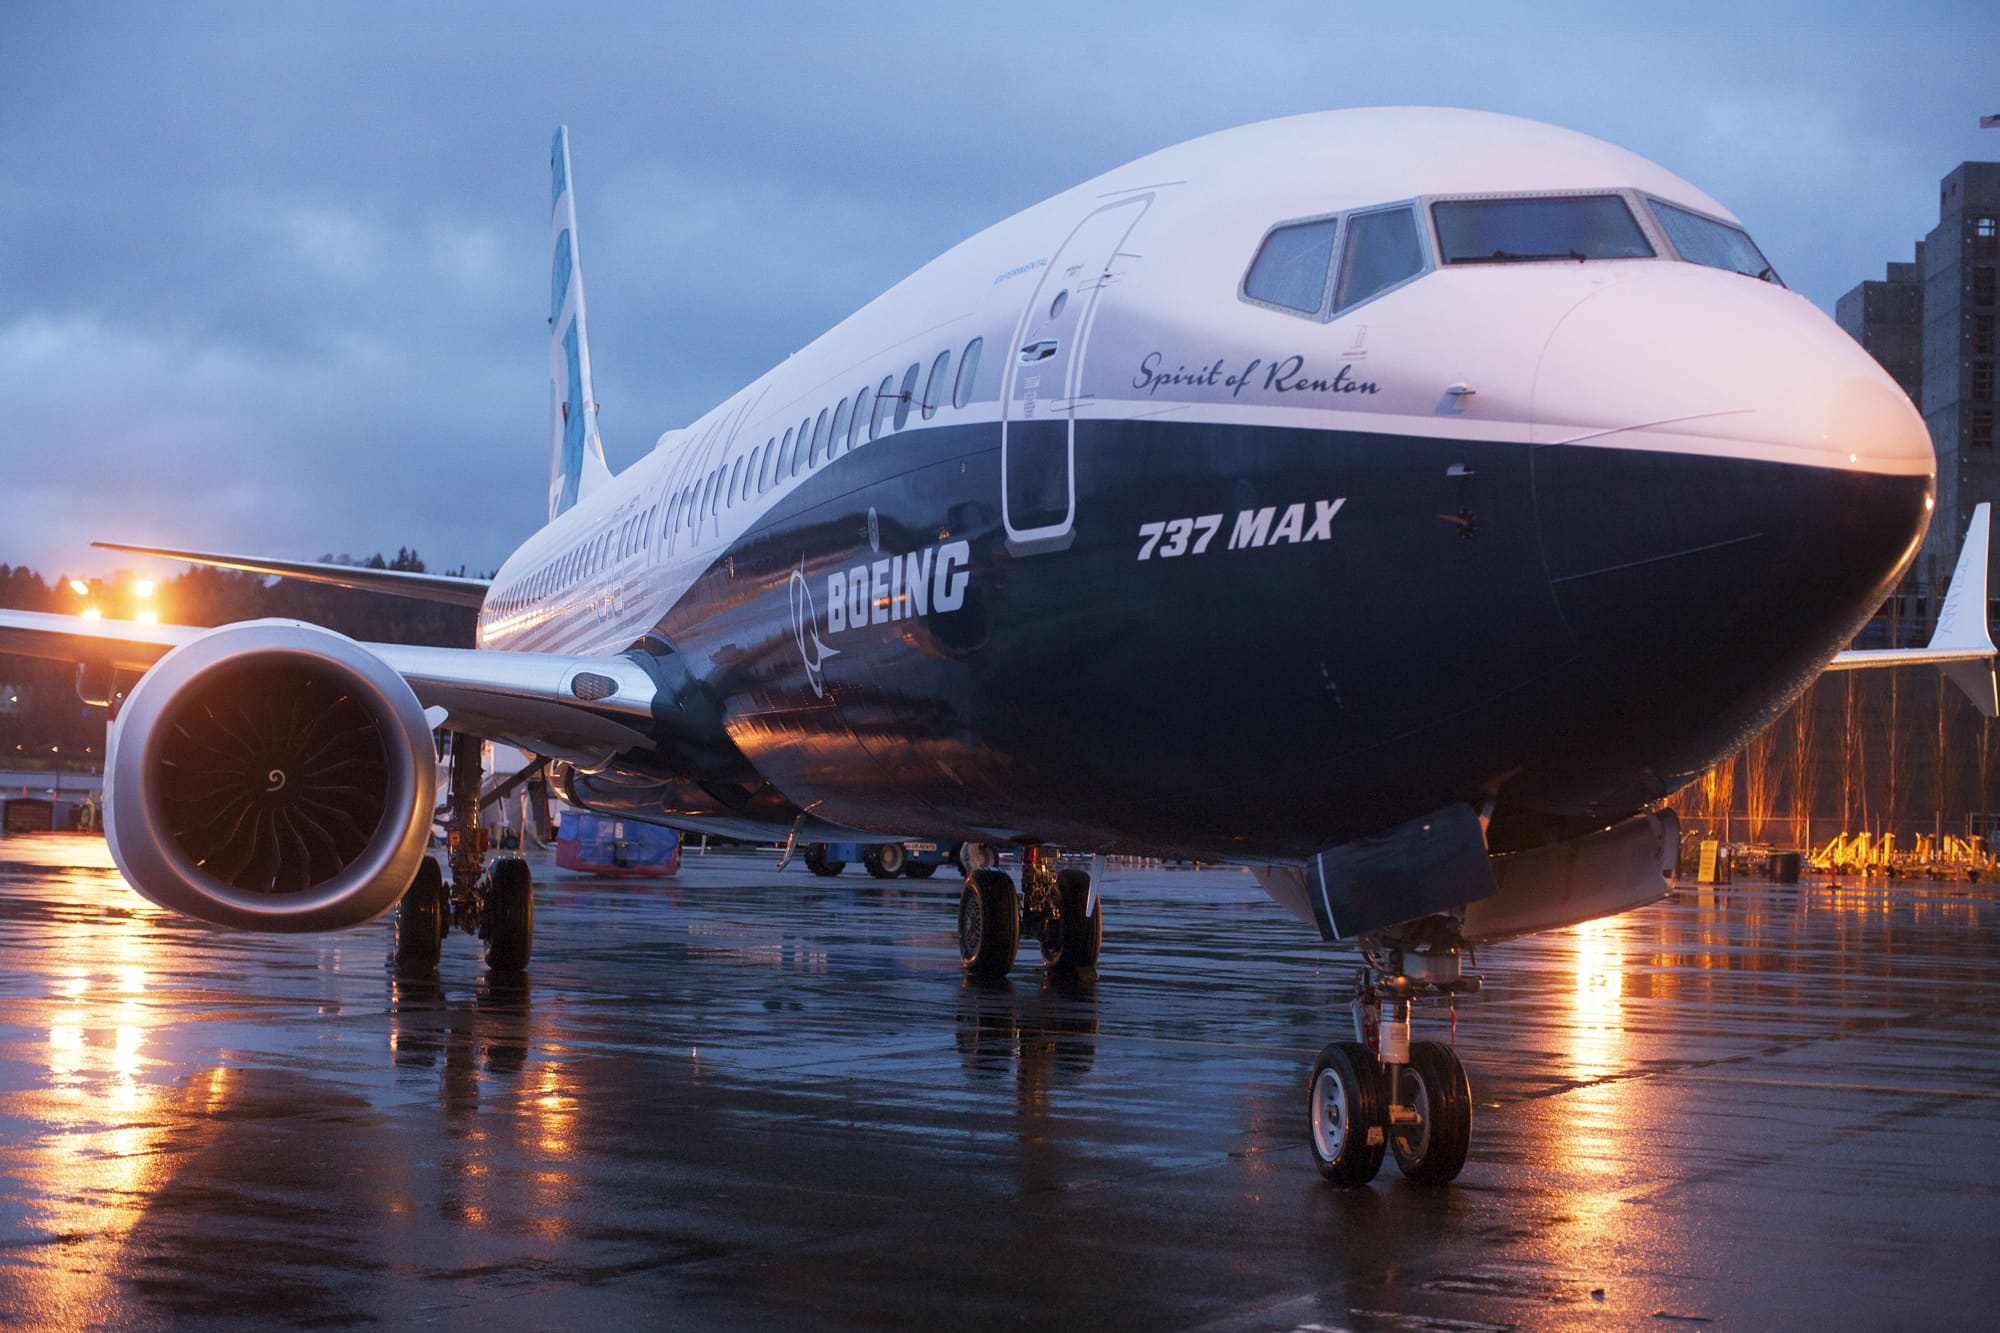 Several electrical problems found on some Boeing 737 Max, sources say